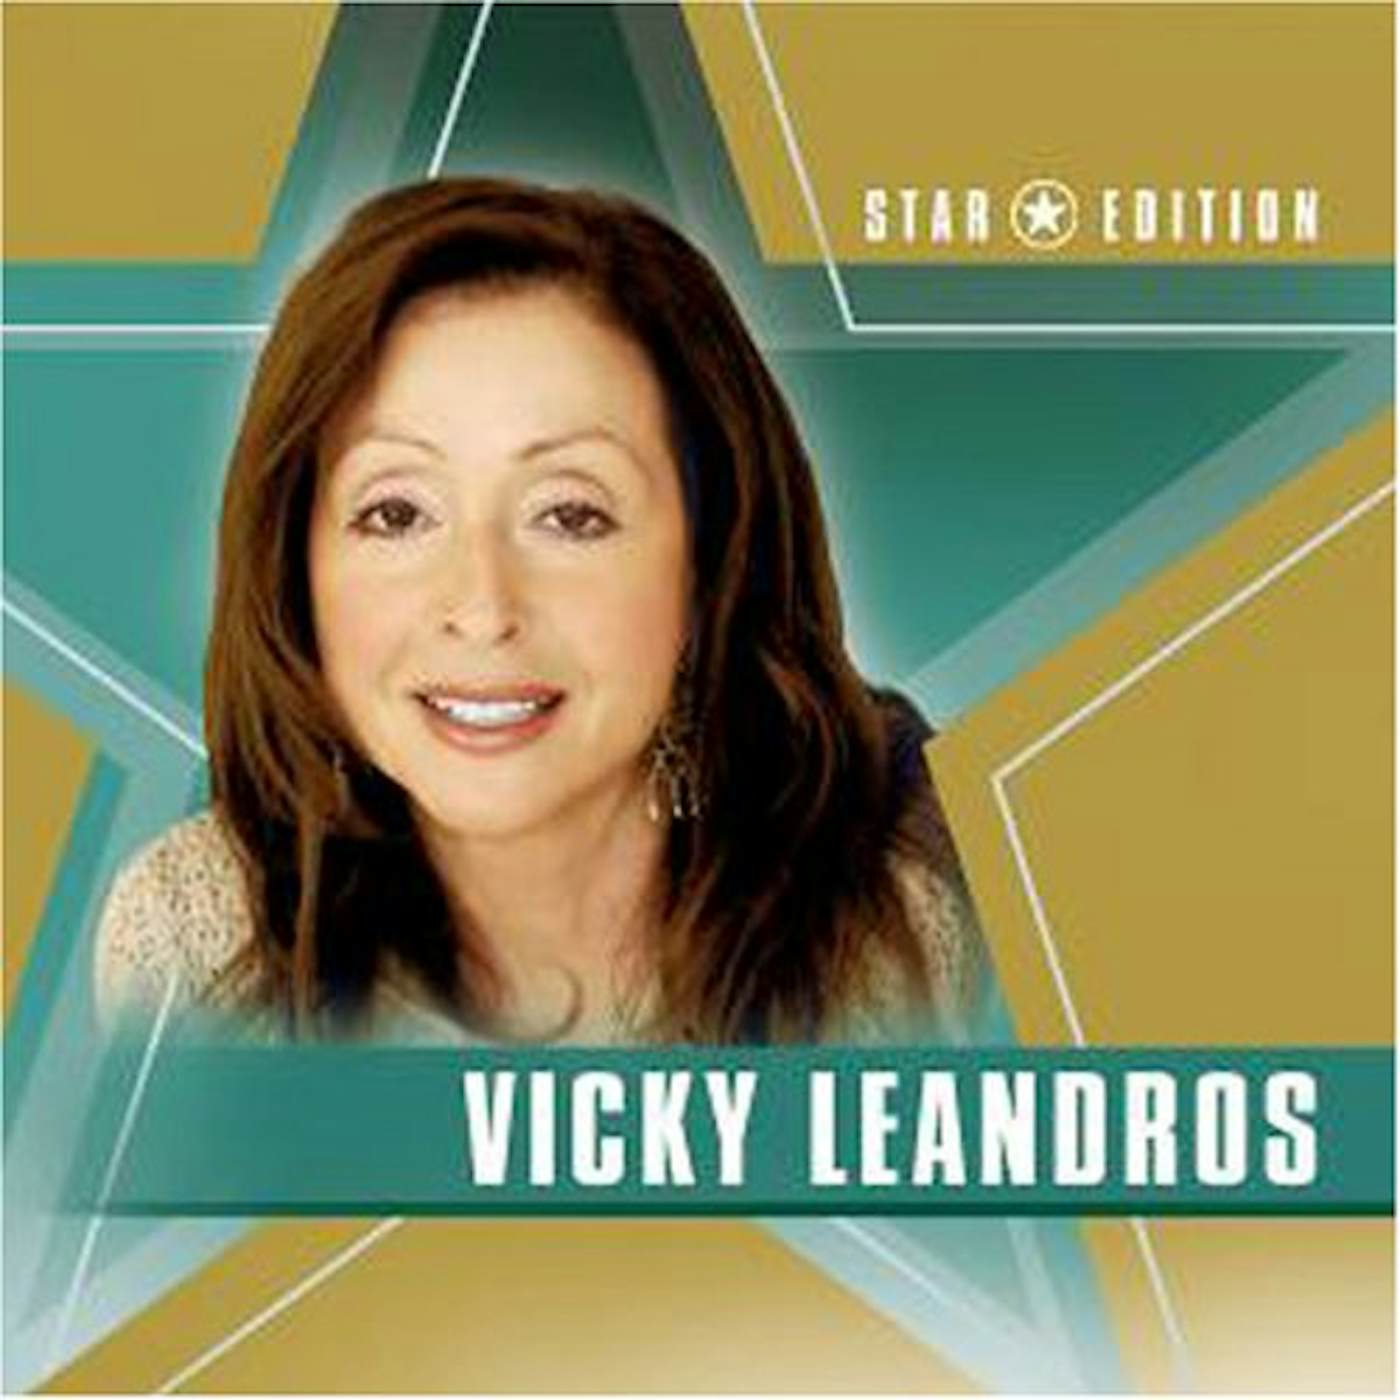 Vicky Leandros STAR EDITION CD